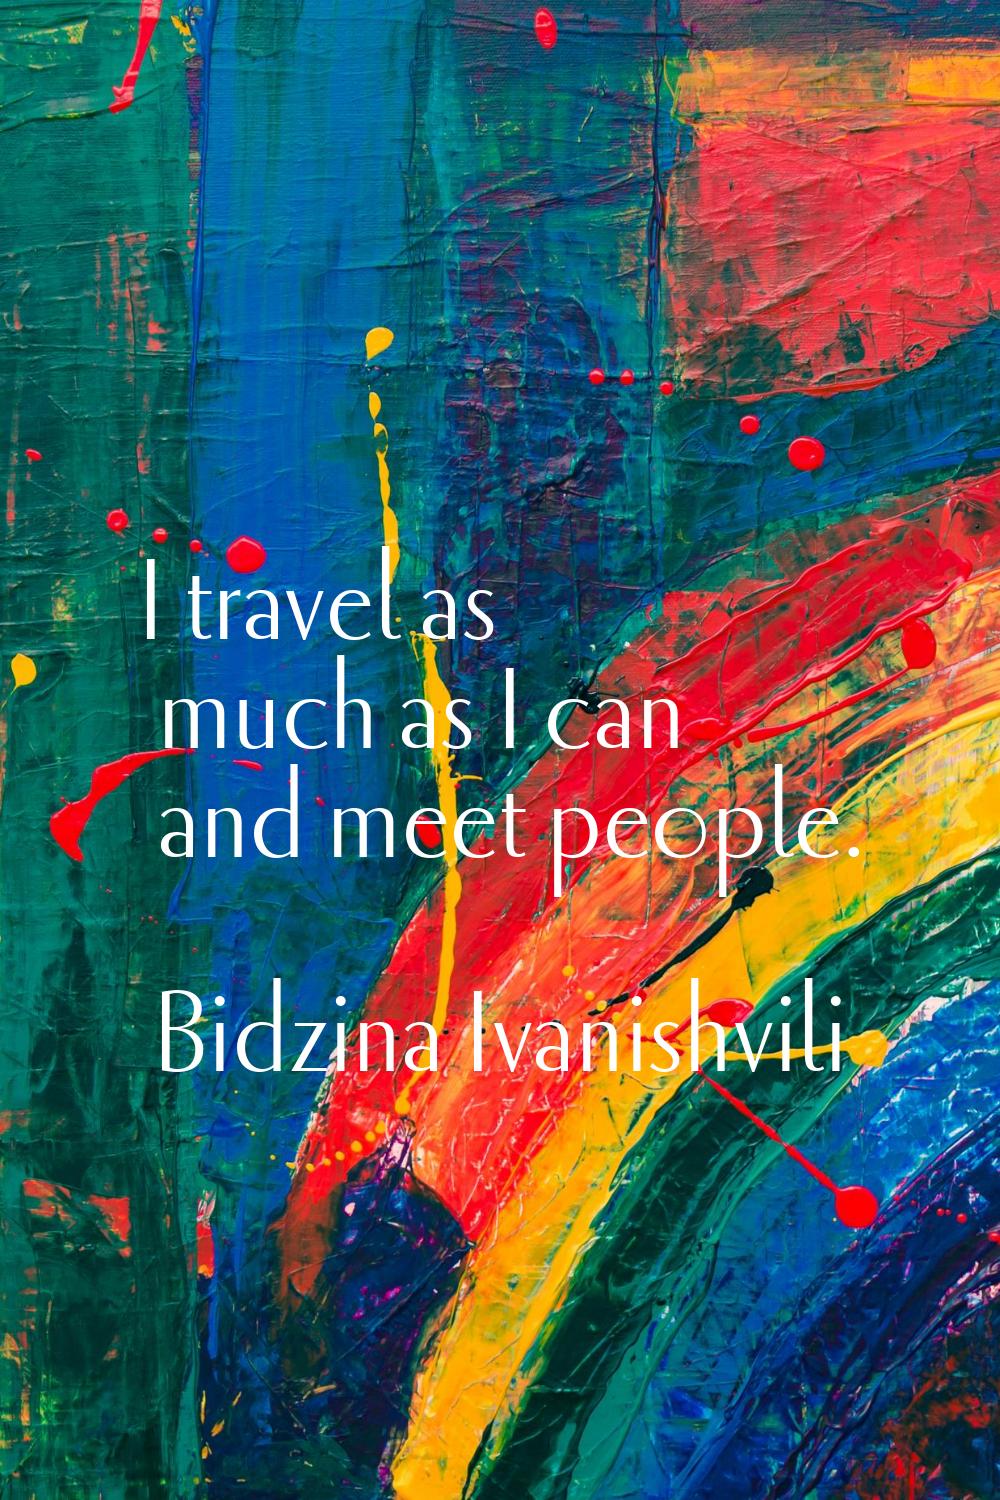 I travel as much as I can and meet people.